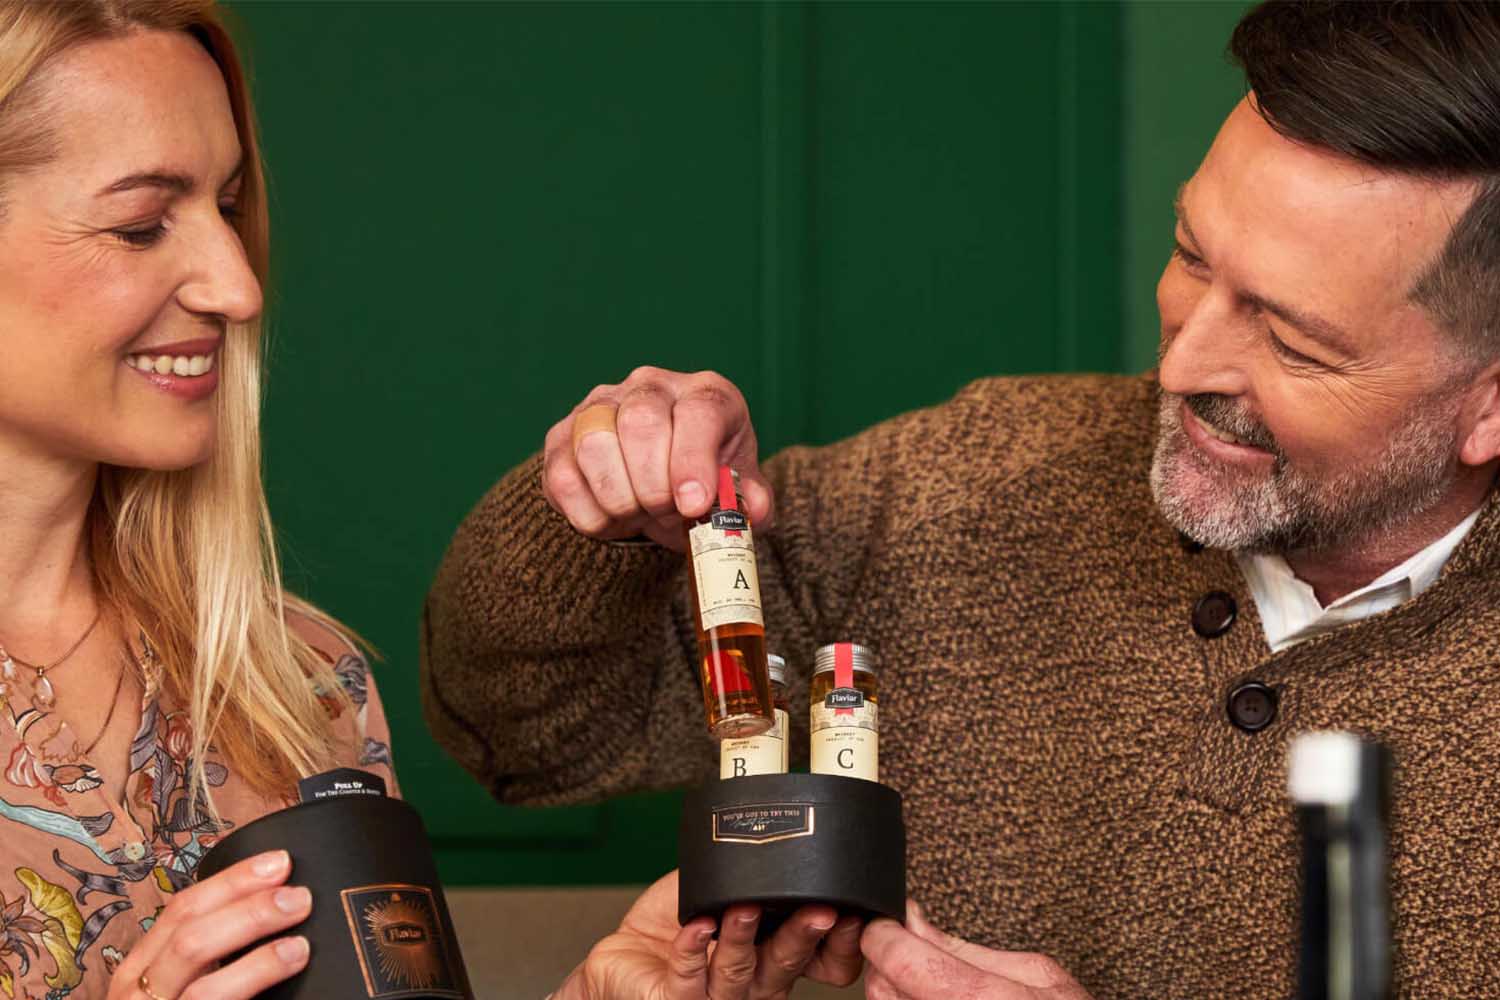 Tasting boxes are part of Flaviar's Whiskey Gift Subscriptions